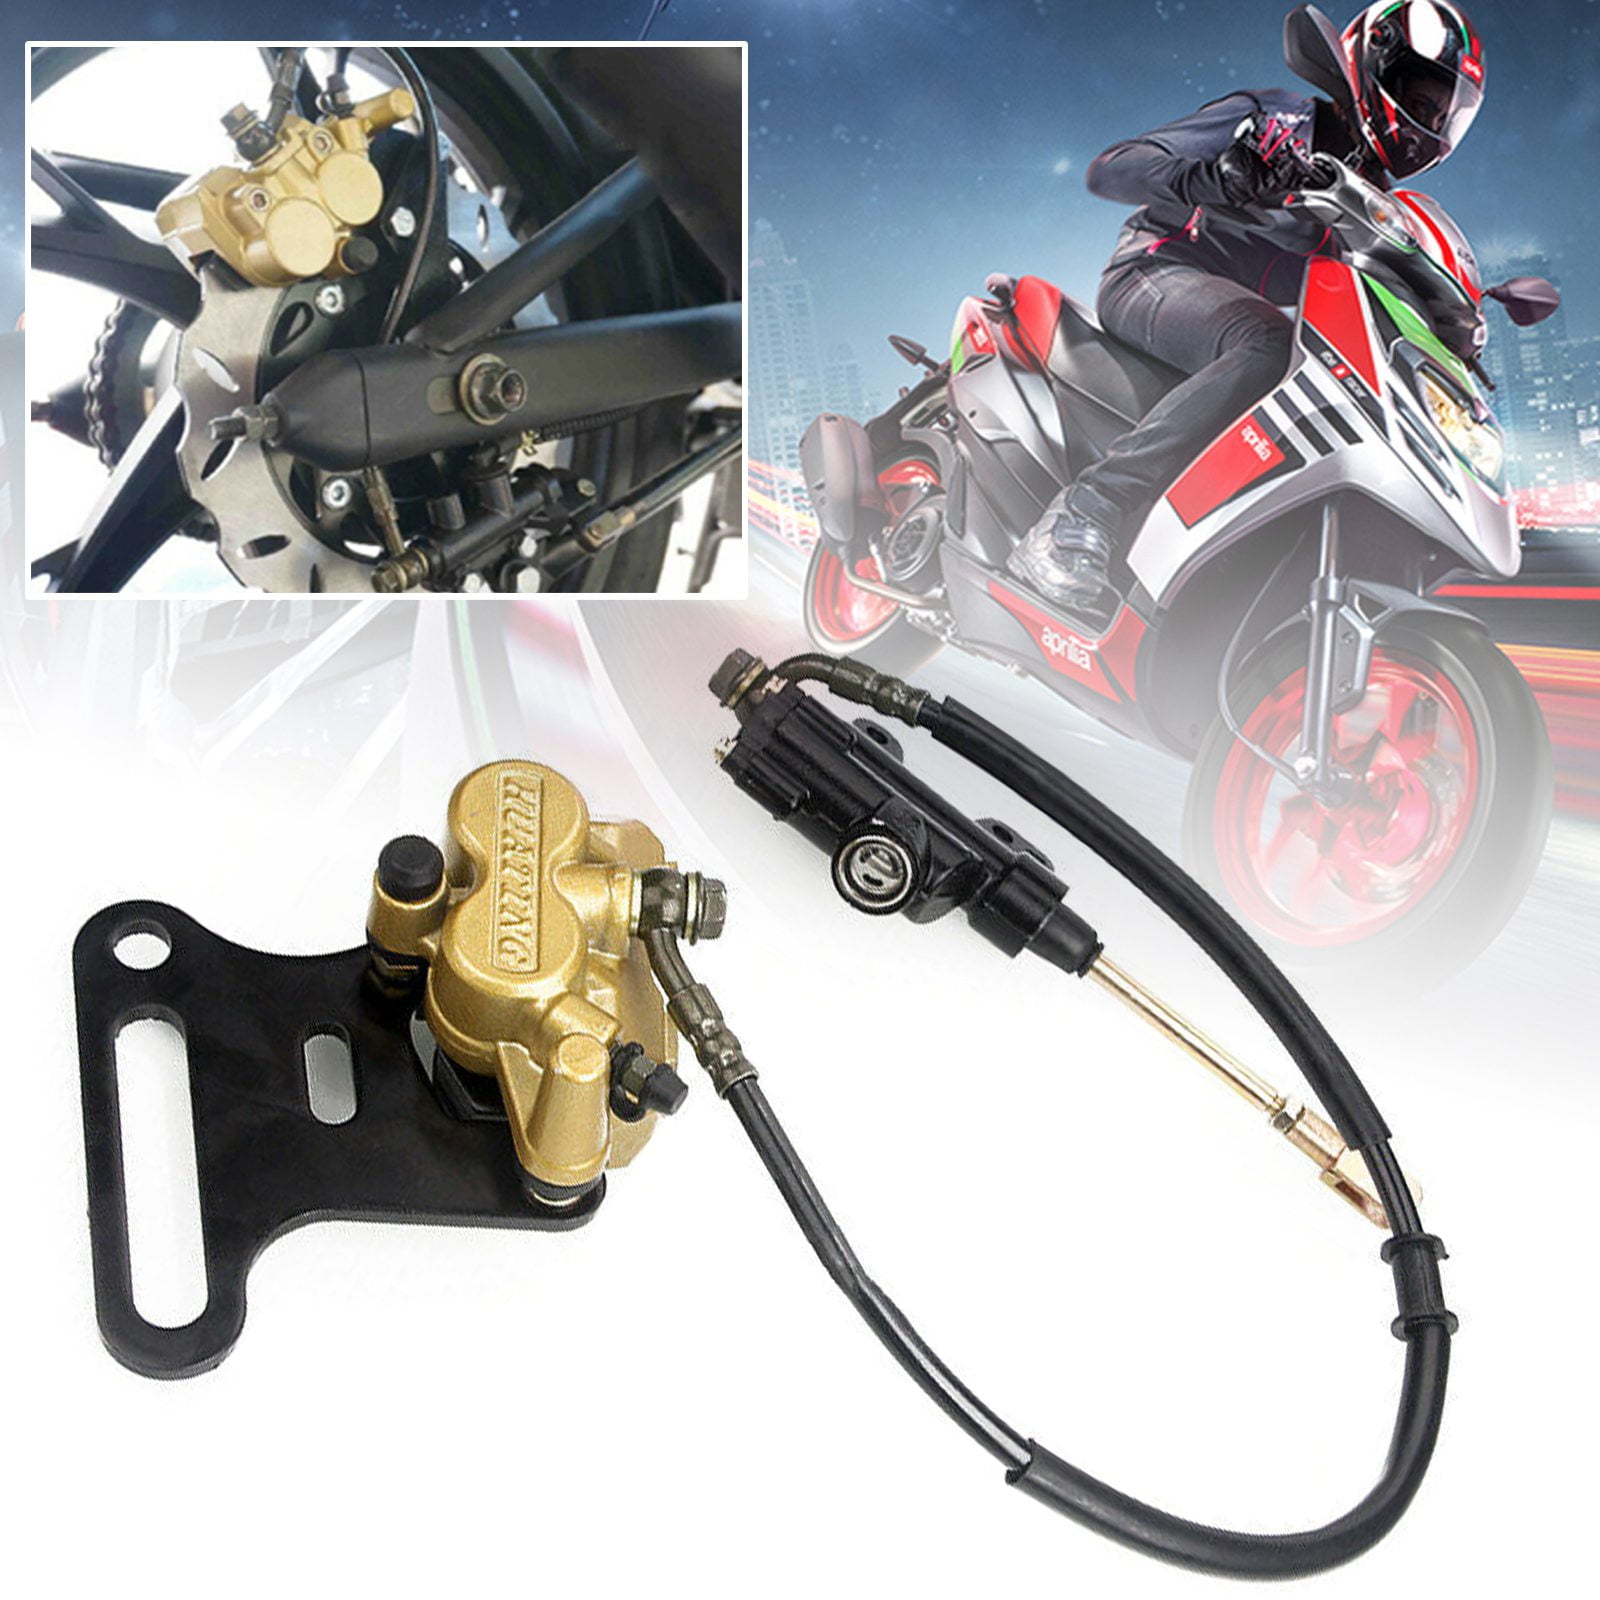 Direct replacement 48 cm Cable Hydraulic Rear Disc Brake Caliper with Master Cylinder & Brake Pads Brake System Fit 110cc 125cc 140cc 150cc PIT PRO PIT Bike Trail Bike Dirt Bike Easy Installation 